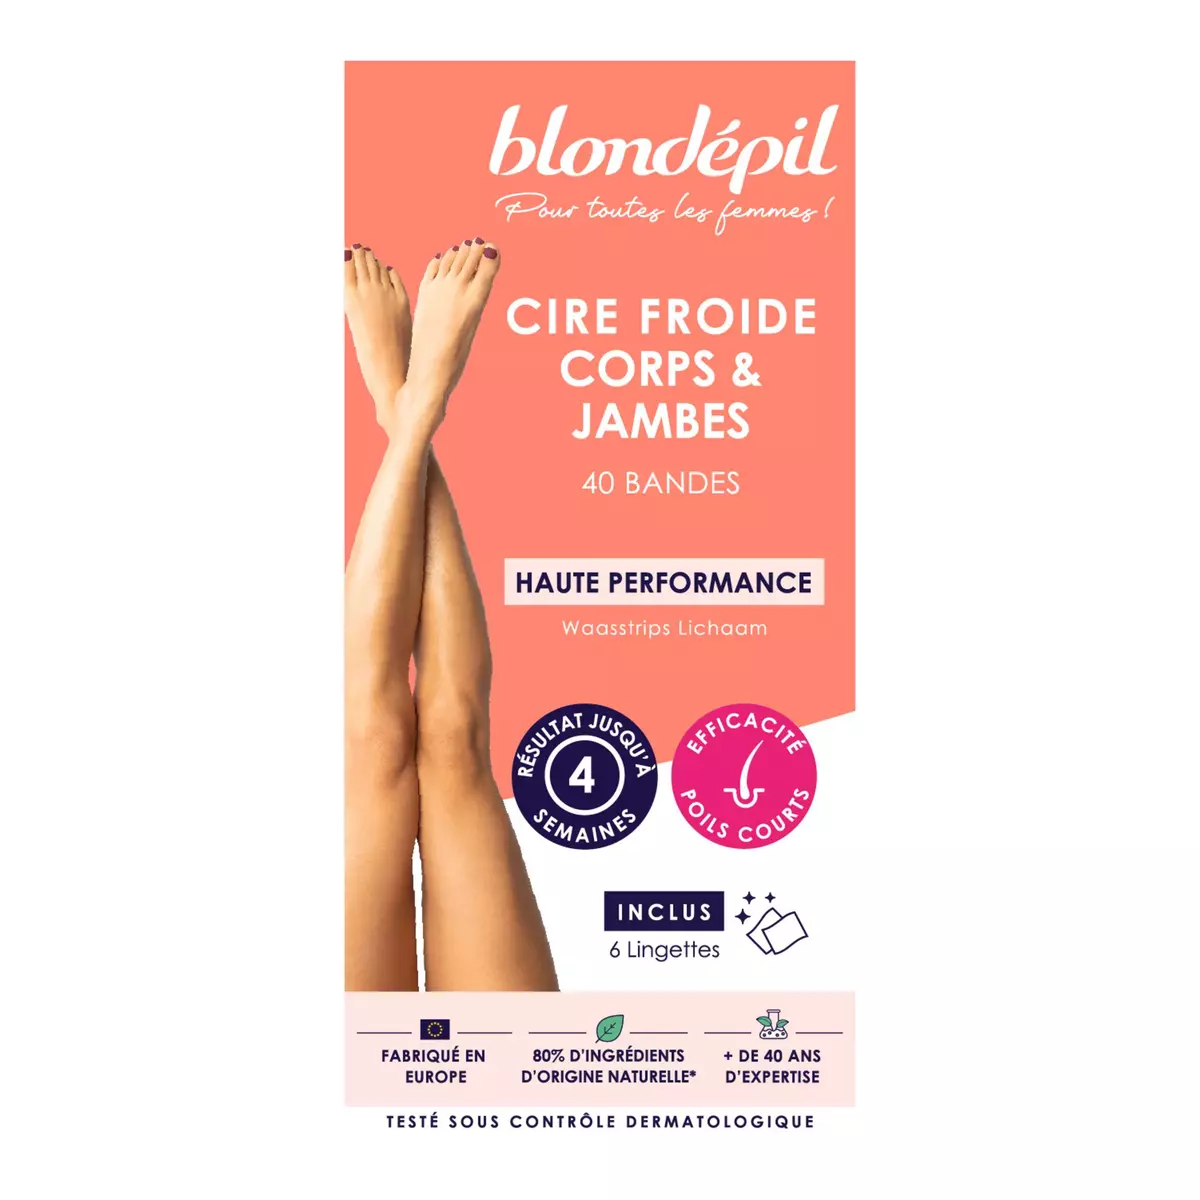 BLONDEPIL Cire froide corps & jambes haute performance 40 bandes + 6 lingettes